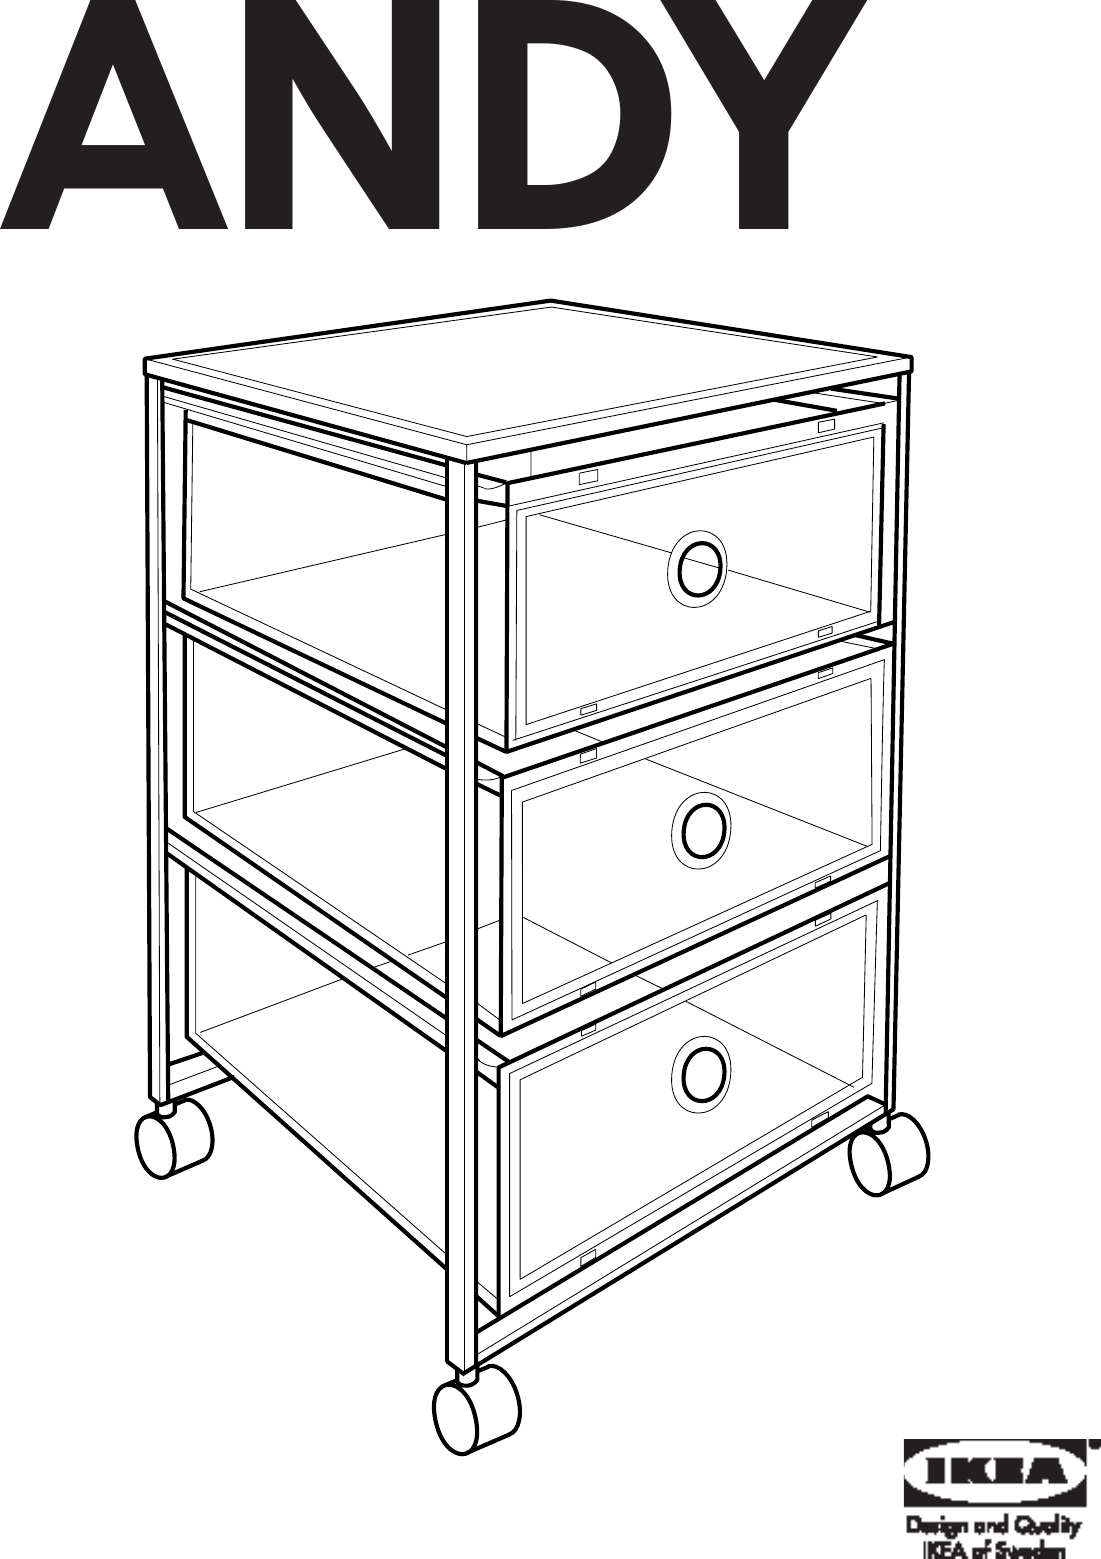 Page 1 of 8 - Ikea Ikea-Andy-Drawer-Unit-W-Casters-15X23-Assembly-Instruction